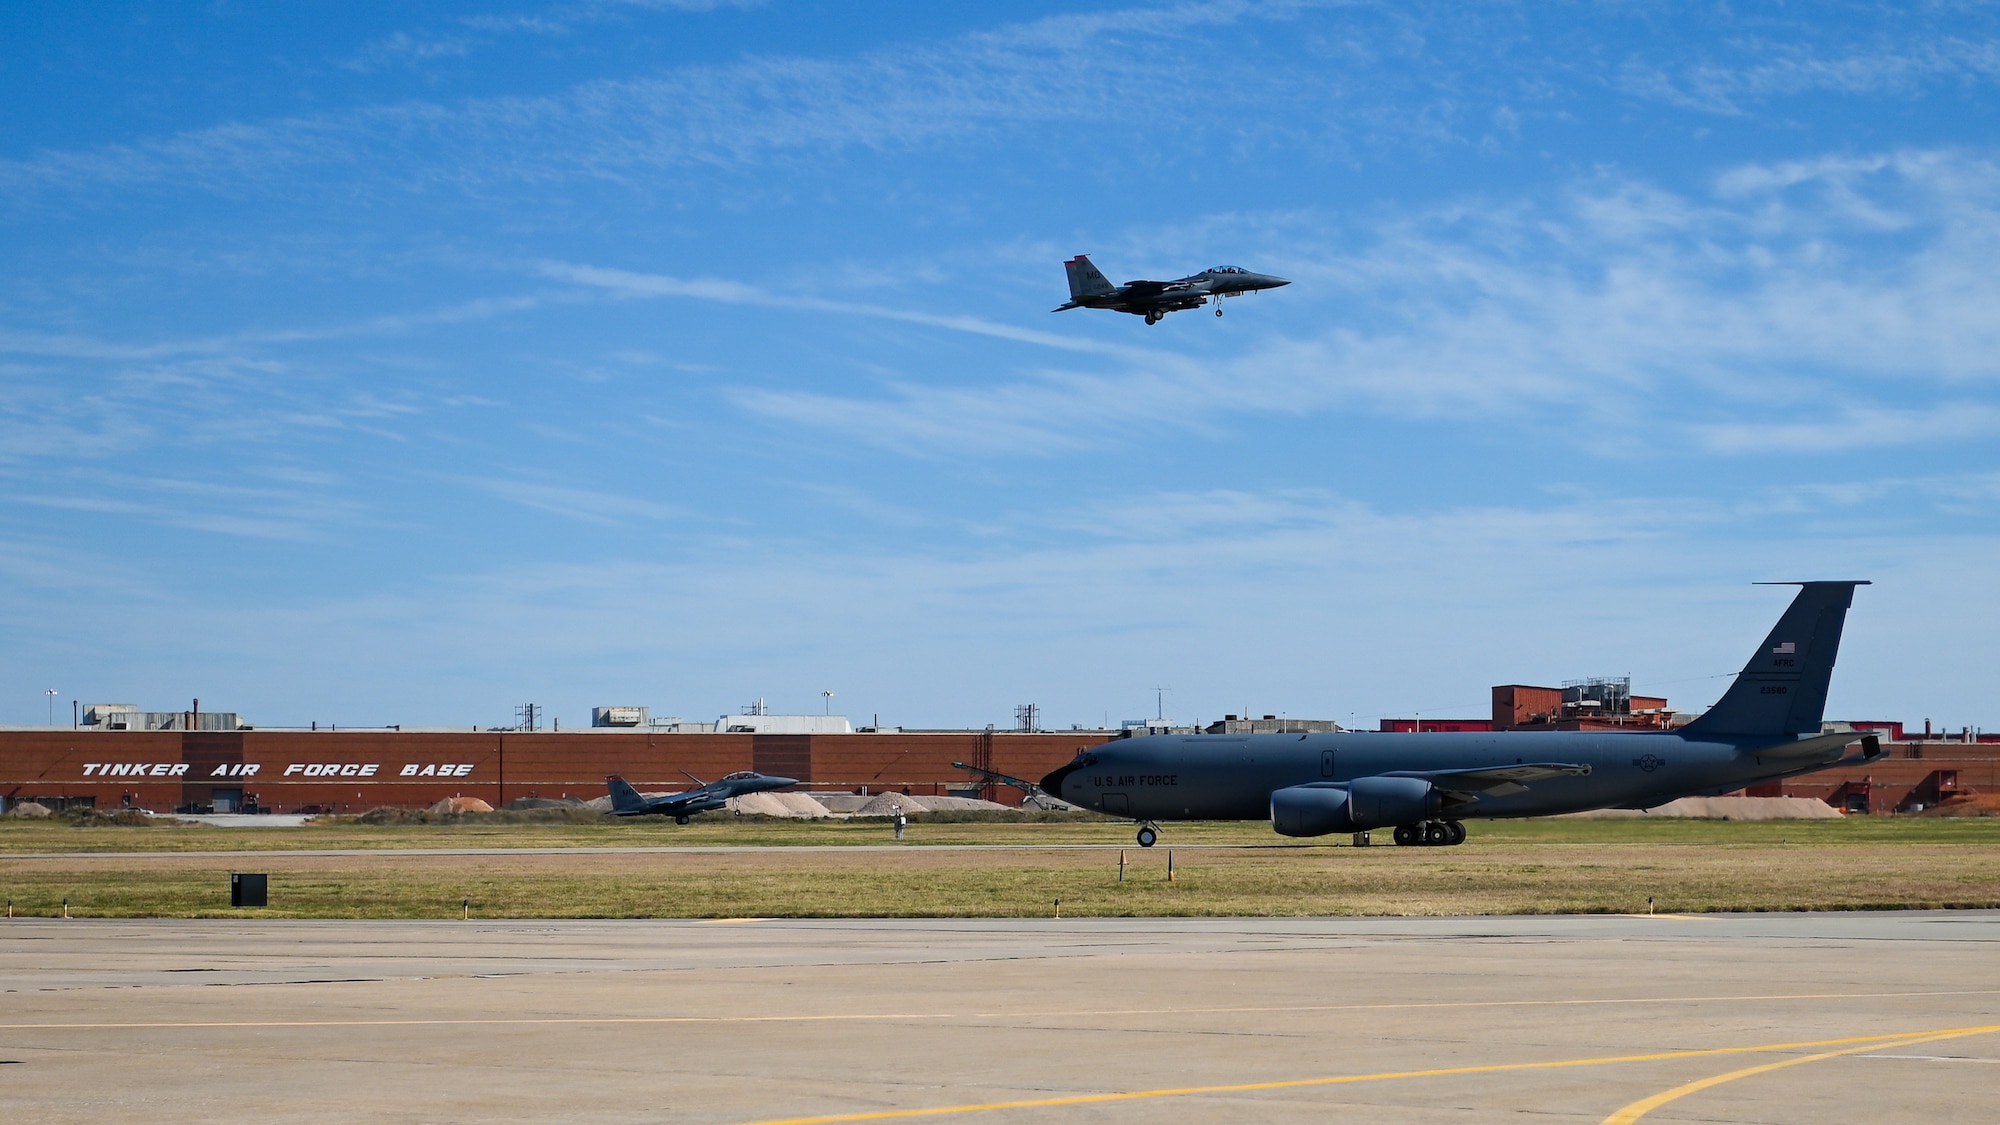 F-15 aircraft in air with KC-135 in foreground